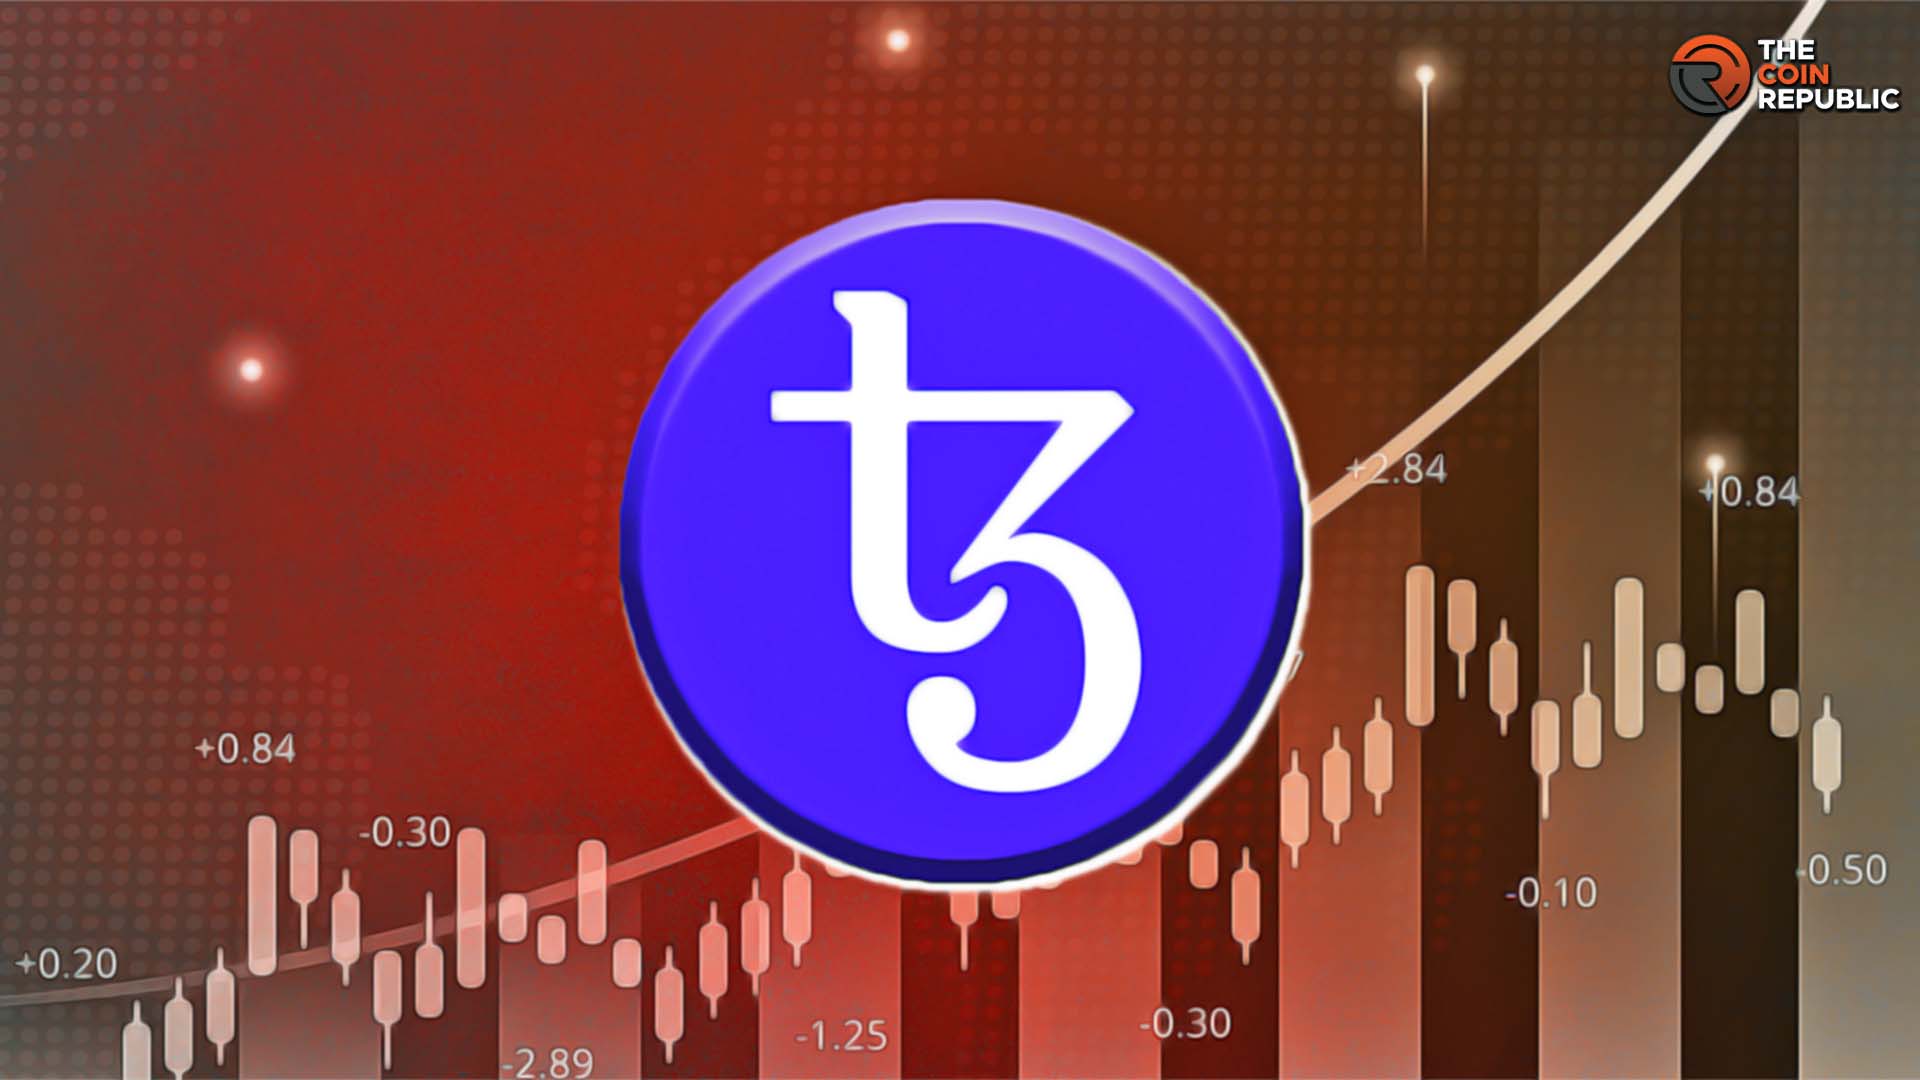 Tezos Price Prediction: XTZ Price Falls After Q2 Report Release